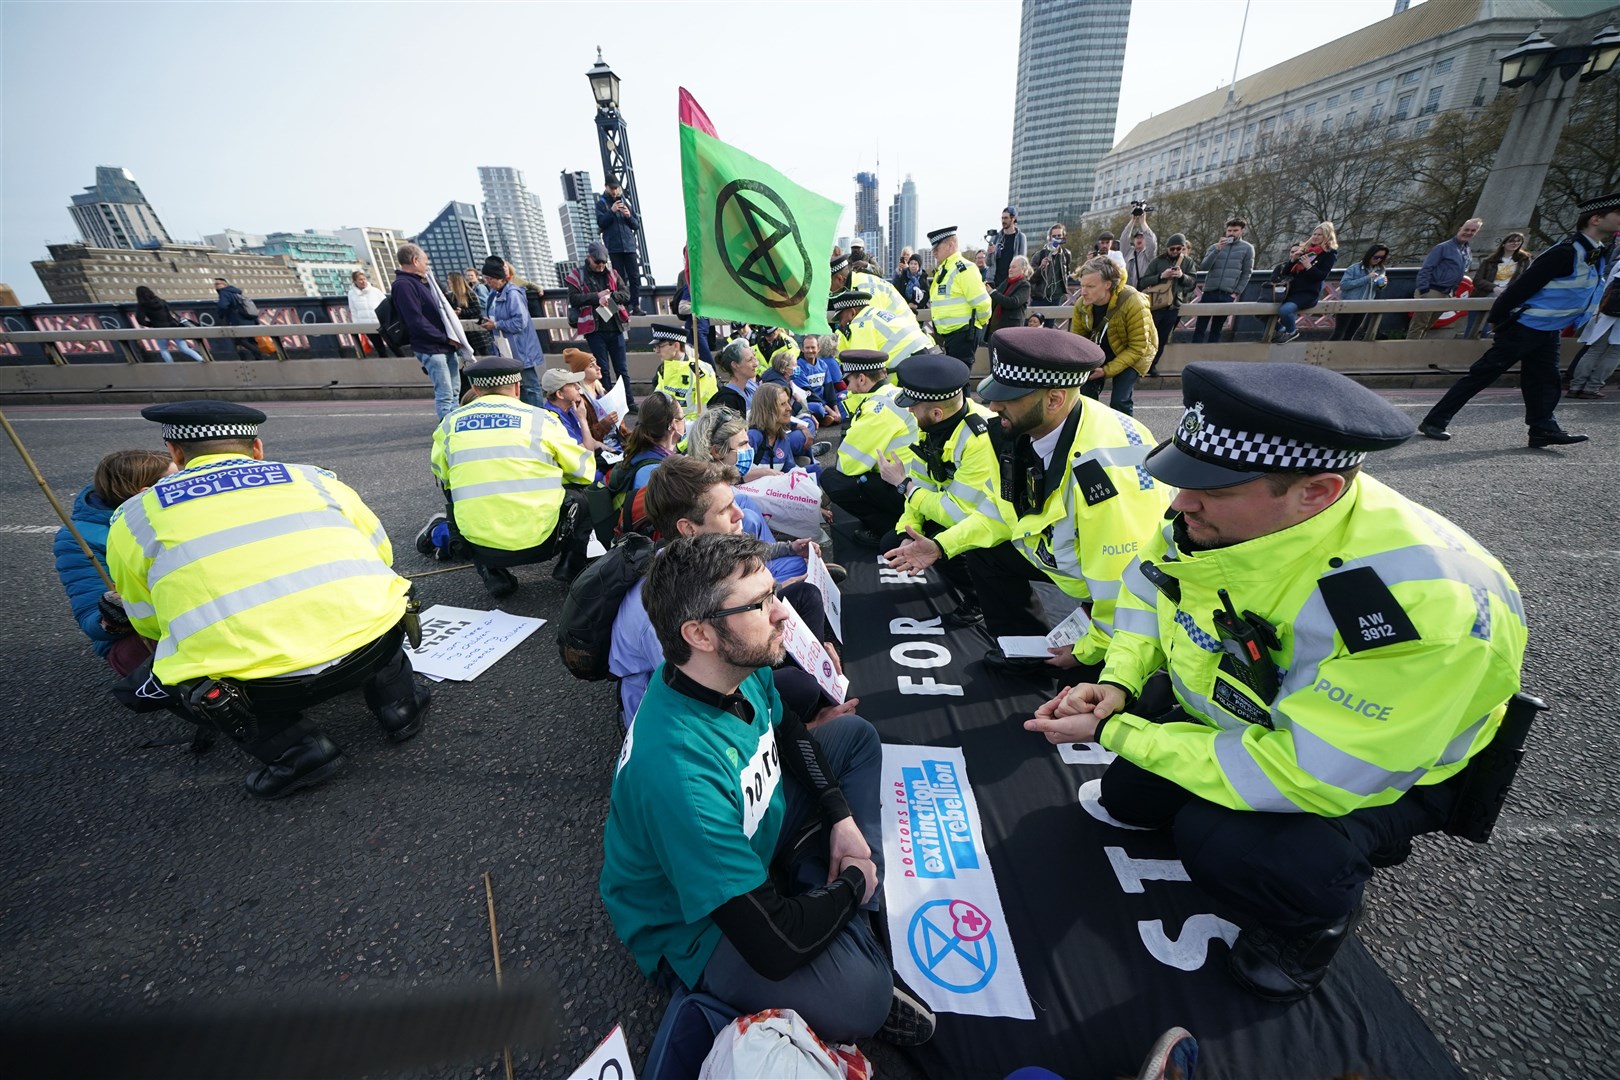 Police talk to protesters taking part in a demonstration on Lambeth Bridge in central London (Yui Mok/PA)